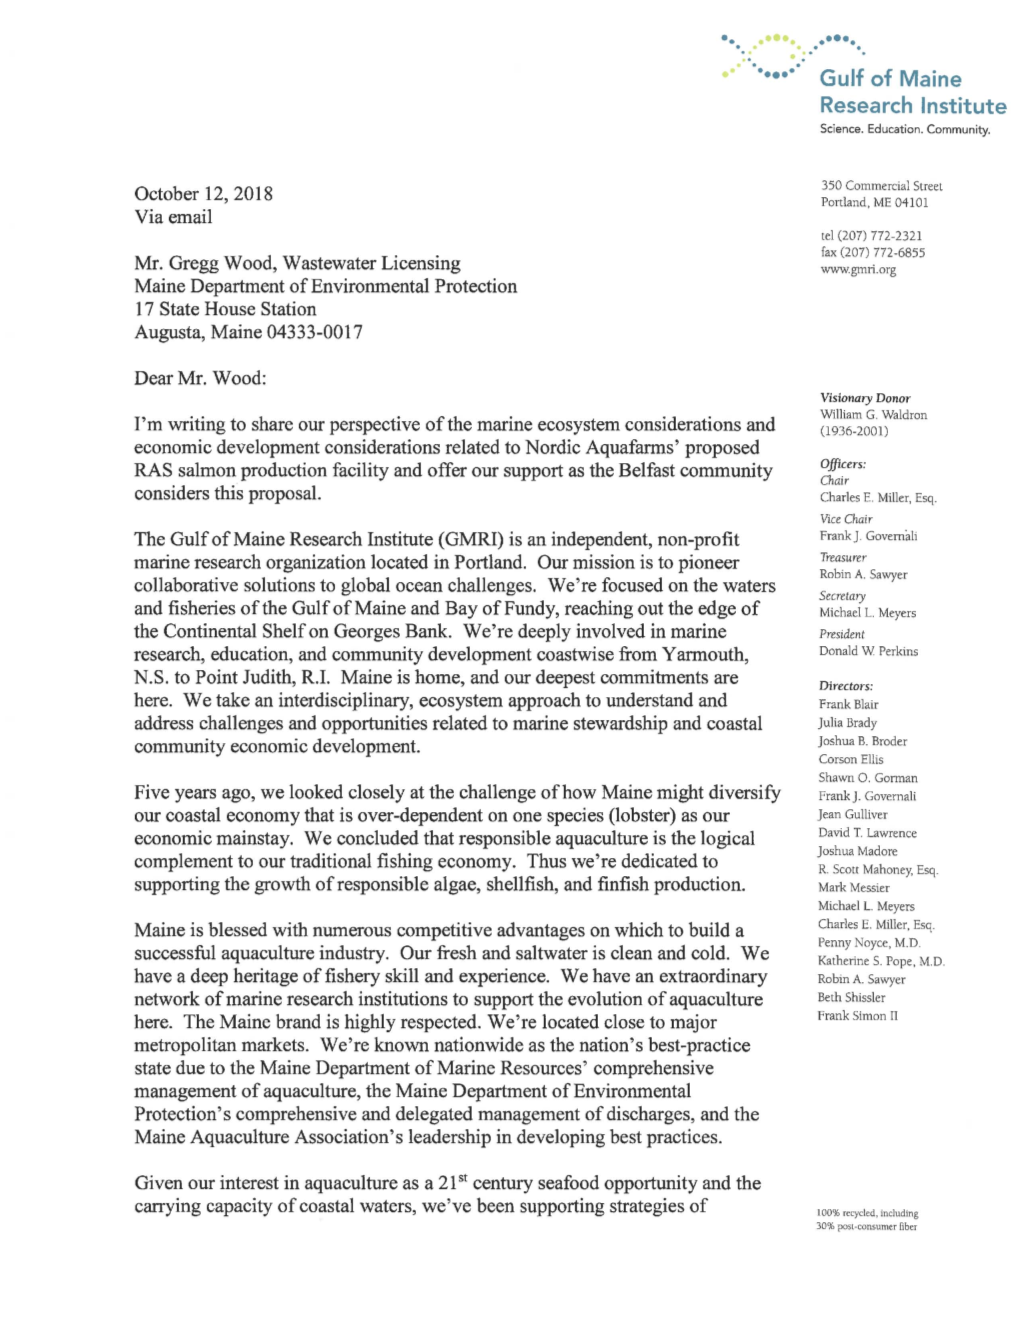 Gulf of Maine Research Institute Letter in Support of Permit